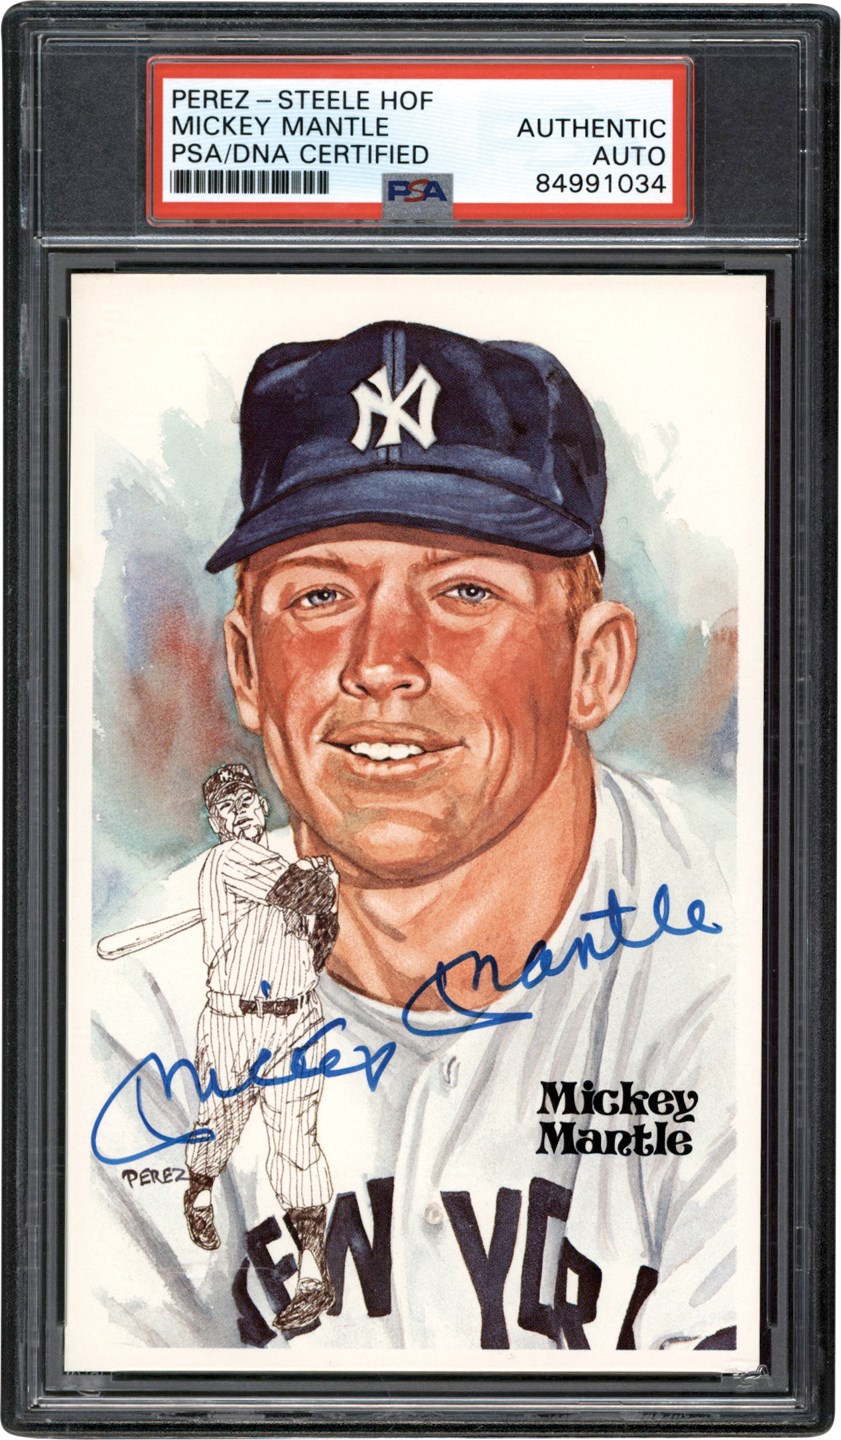 Mantle and Maris - Mickey Mantle Signed Perez Steele Hall of Fame Postcard (PSA)